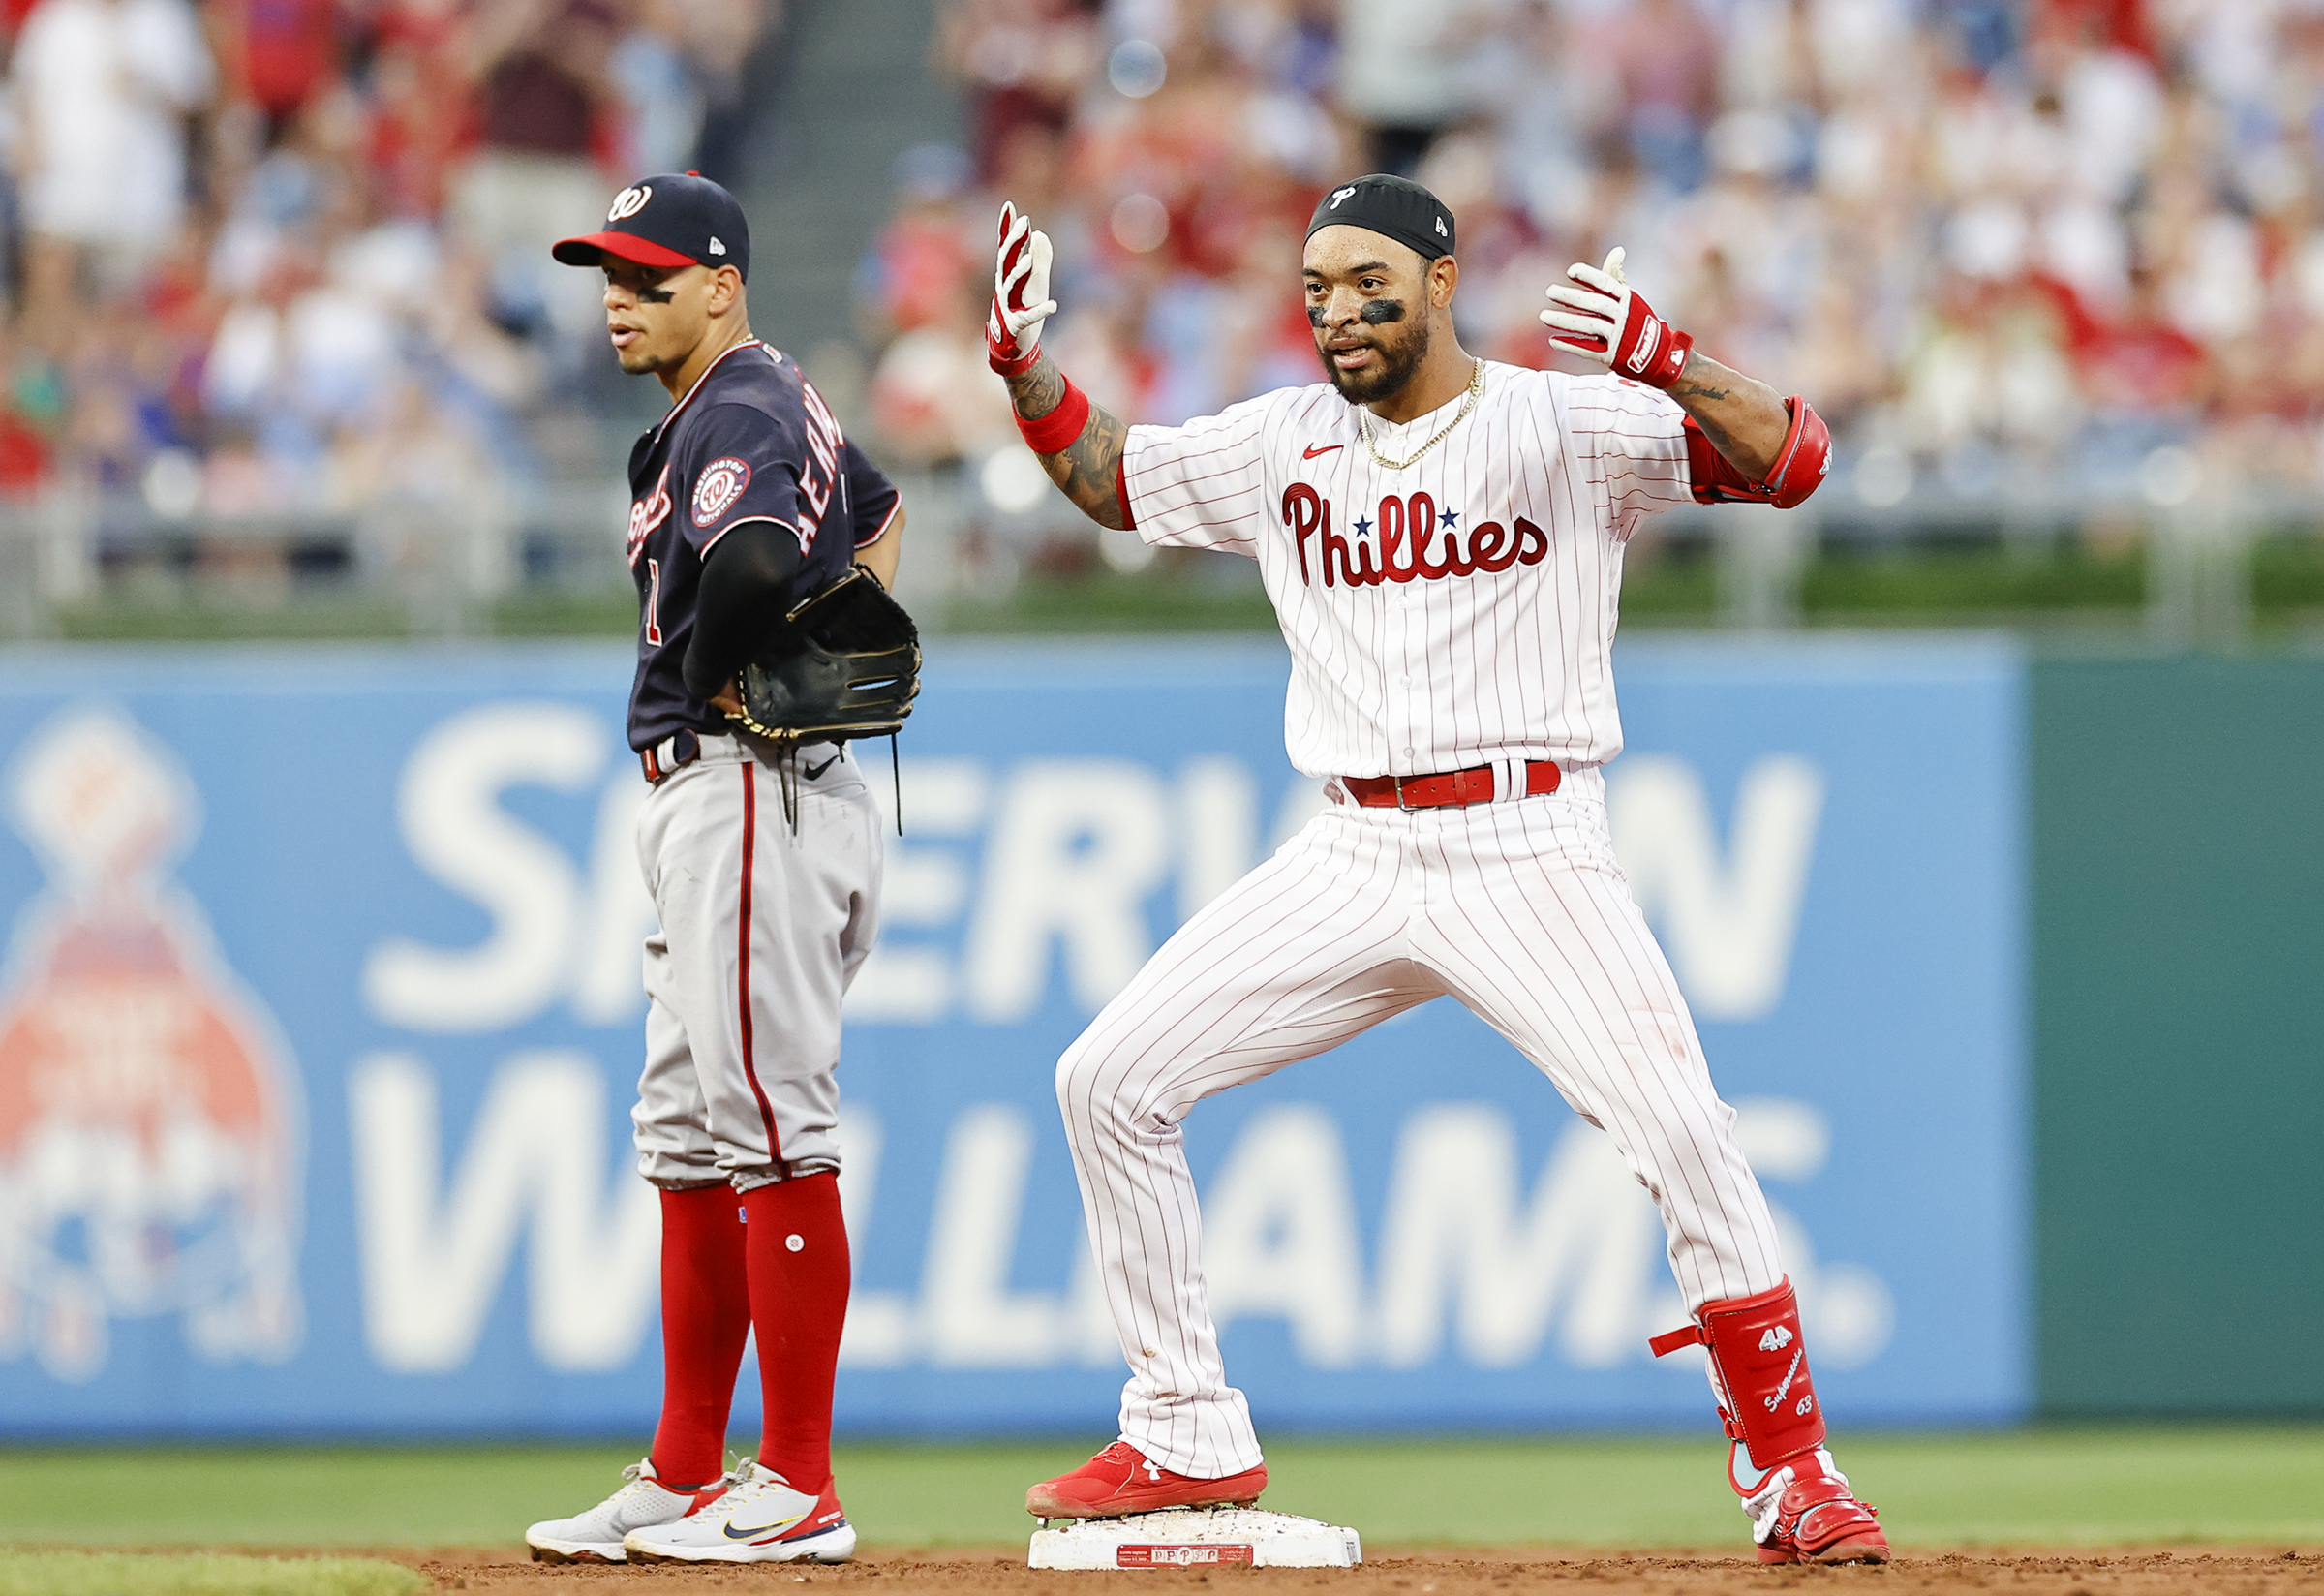 Phillies' trade deadline moves made the roster deeper, better